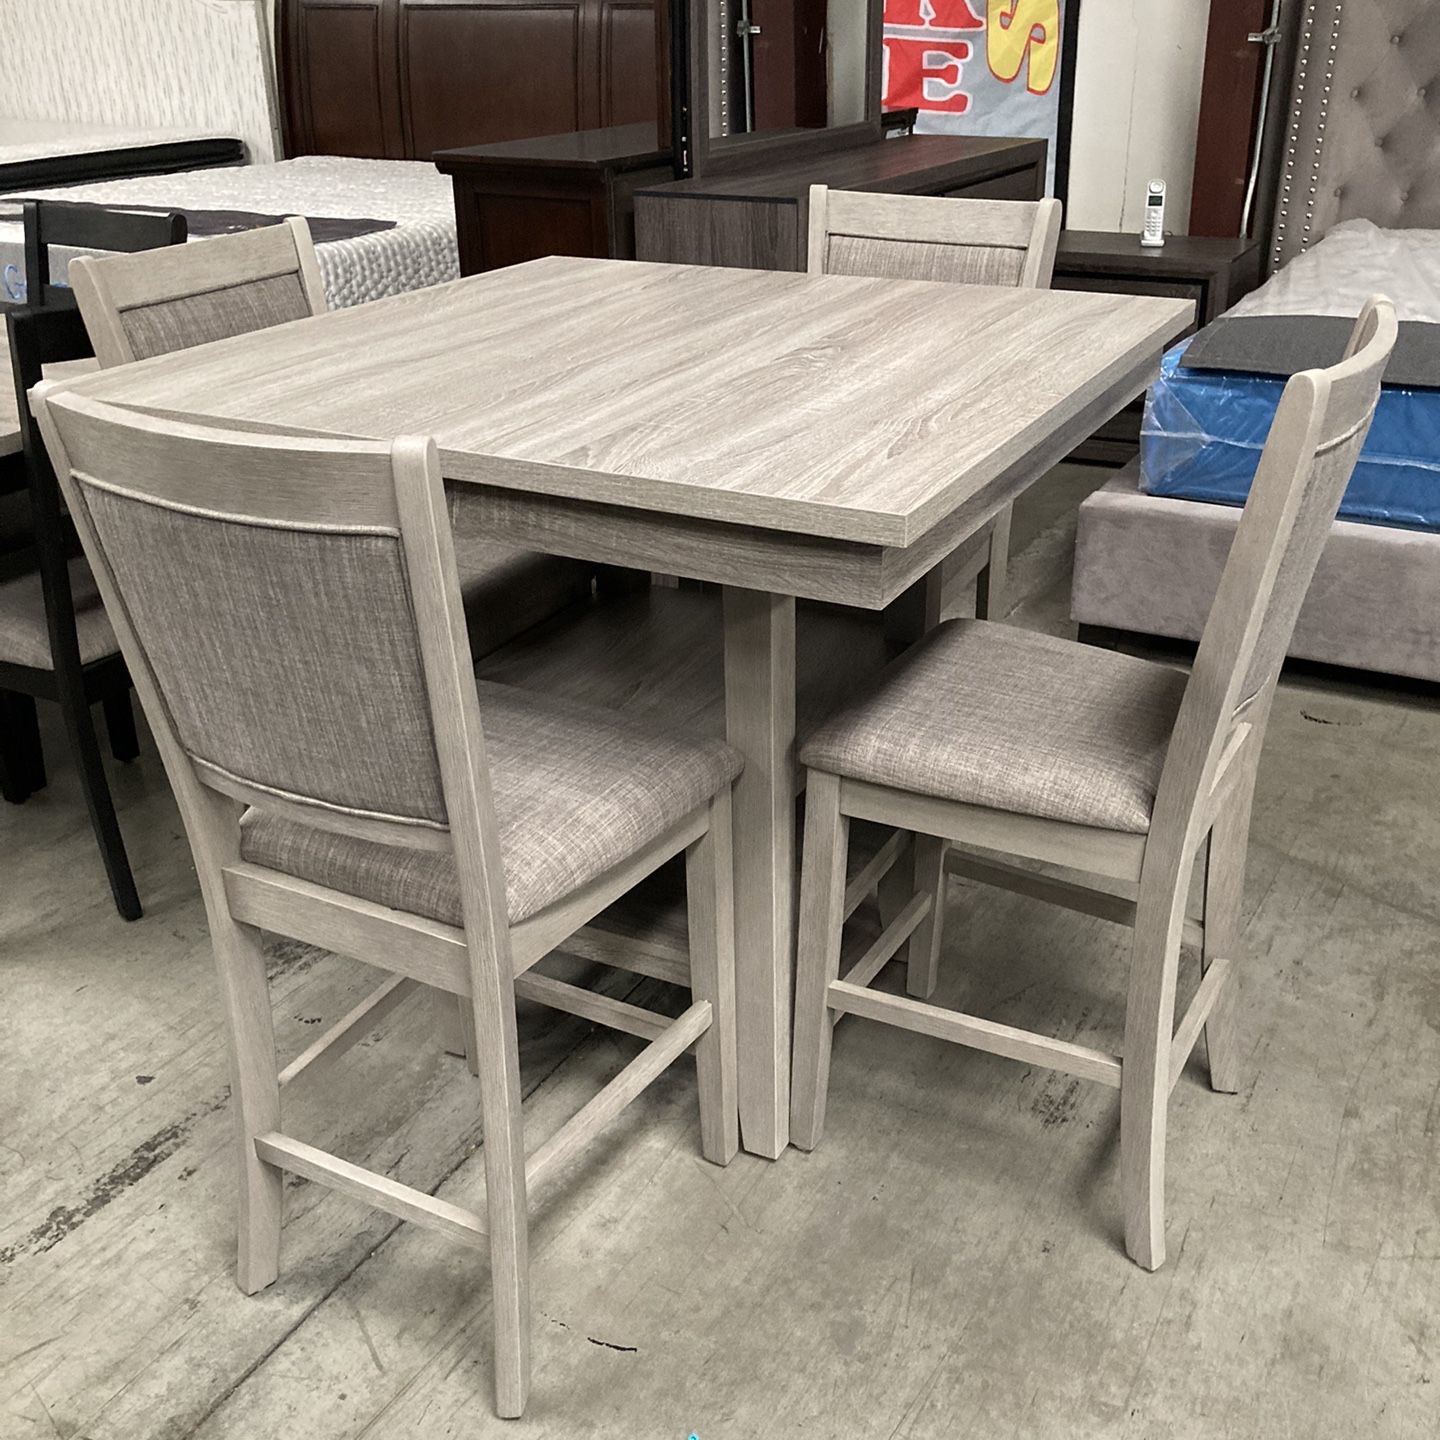 5pc Dining set. Table With Four Chairs. New! Please See Description.